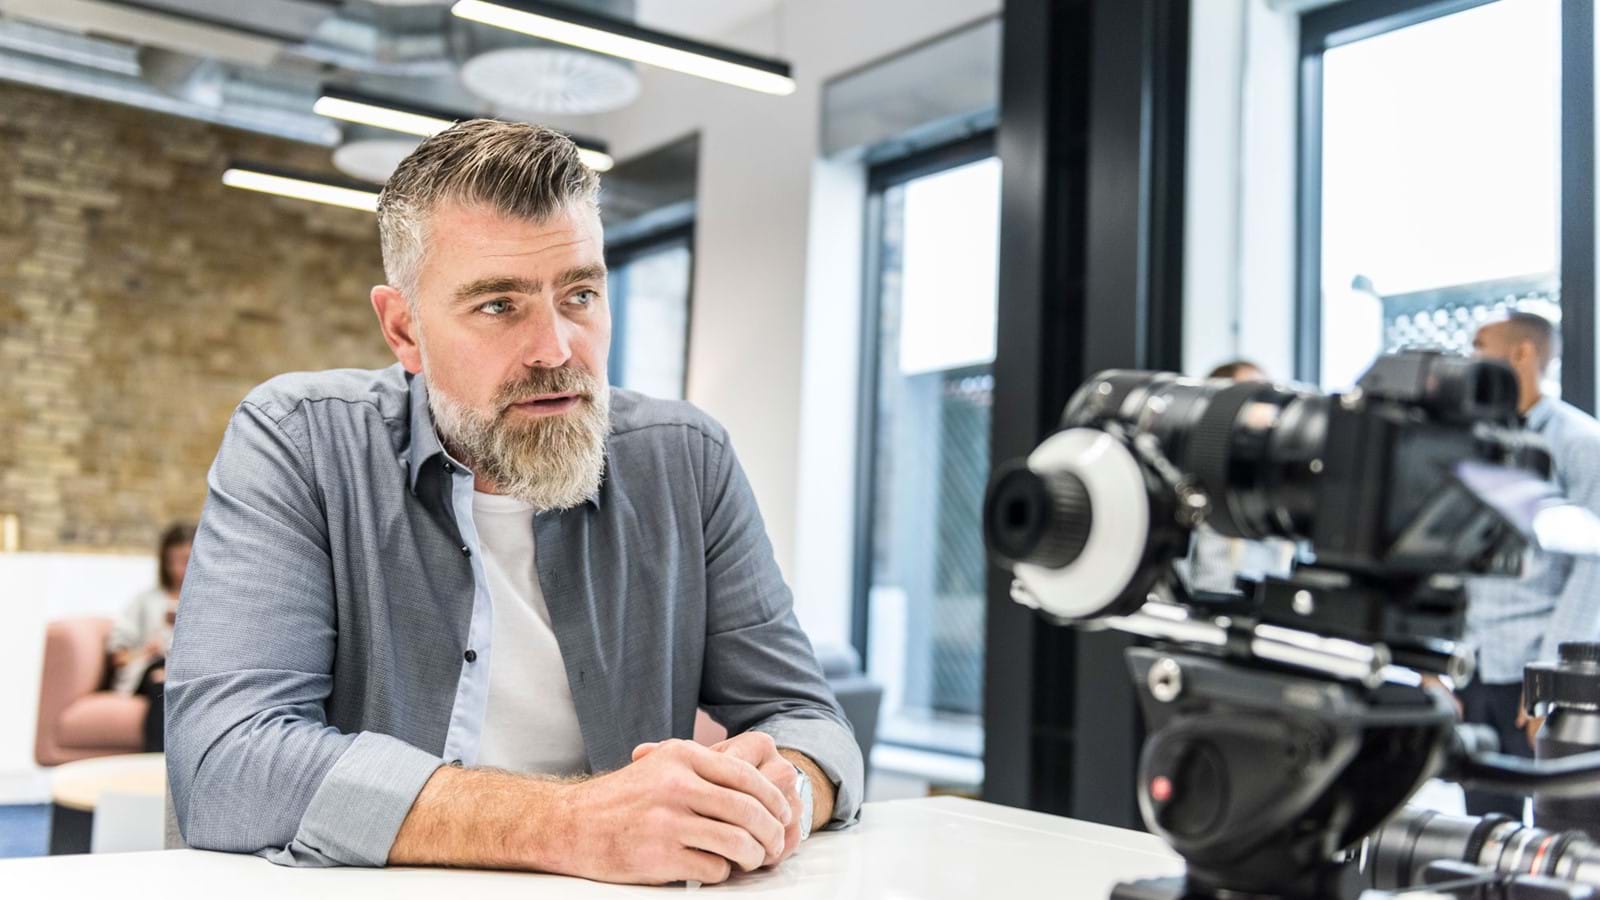 Employee filming himself as part of digital transformation strategy